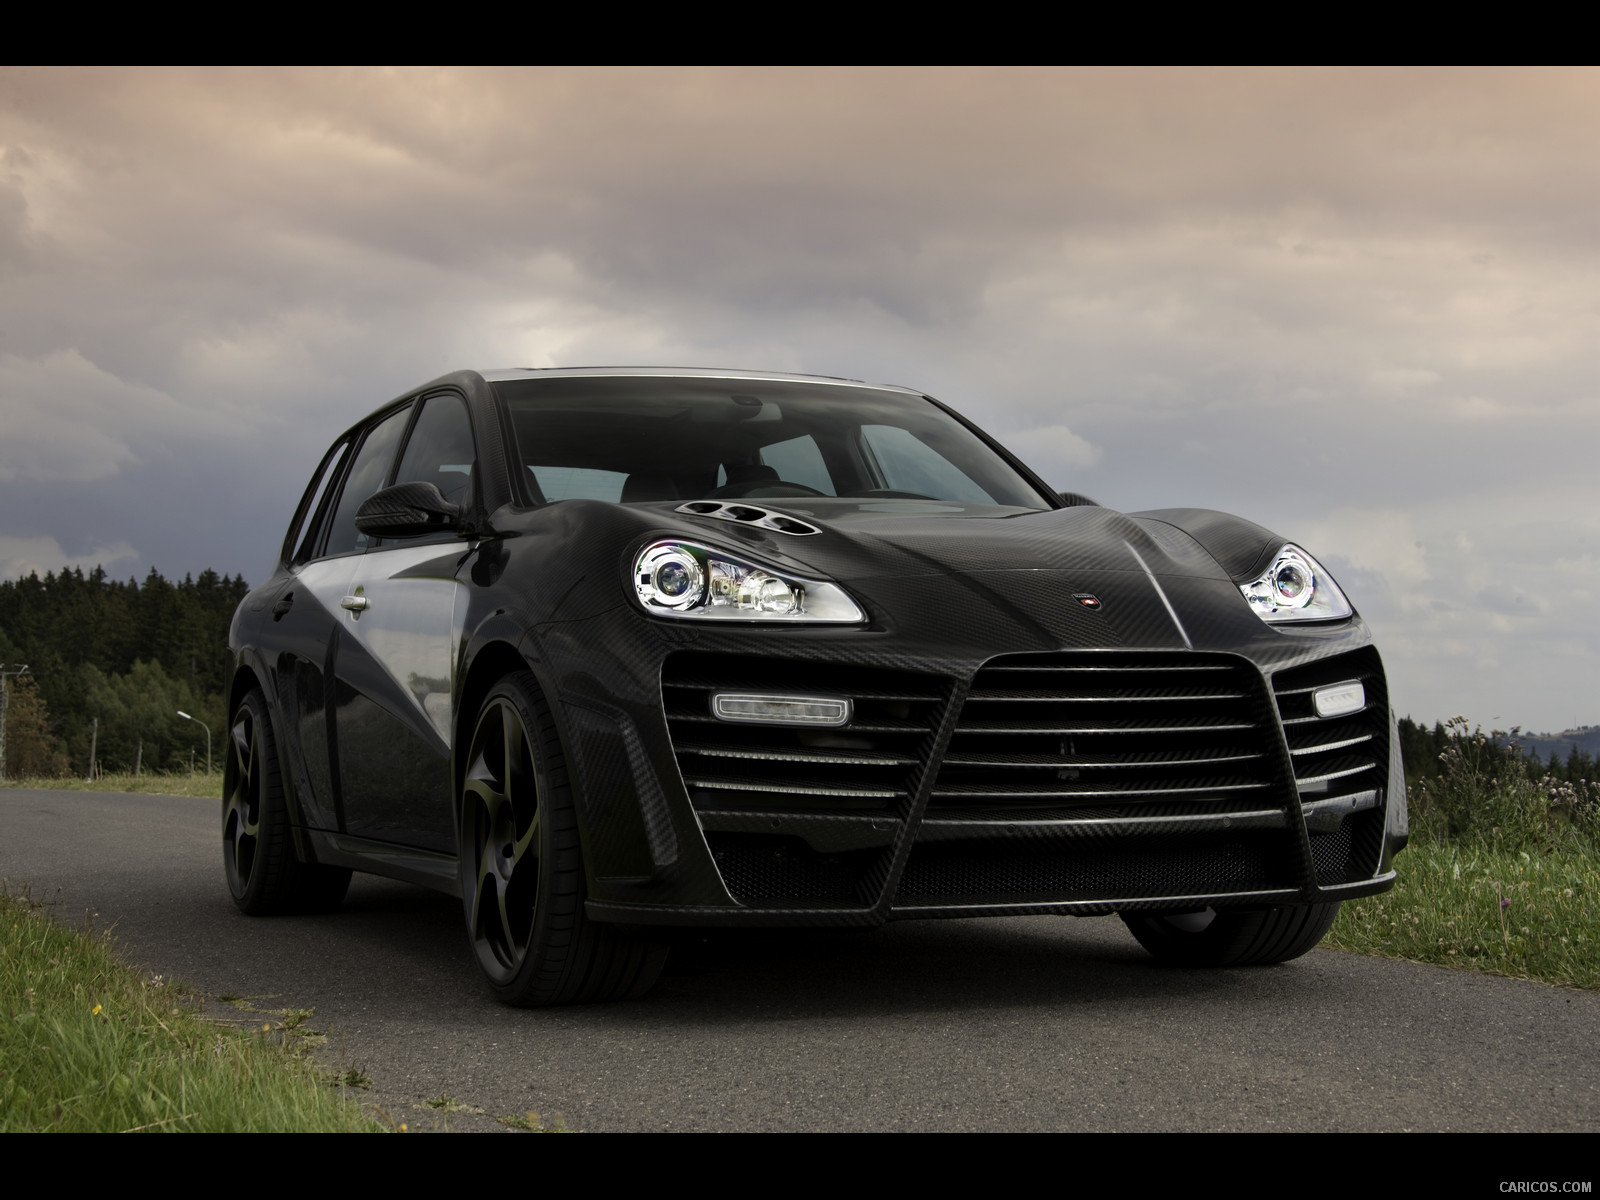 2009 Mansory Chopster based on Porsche Cayenne Turbo S  - Front, #12 of 38